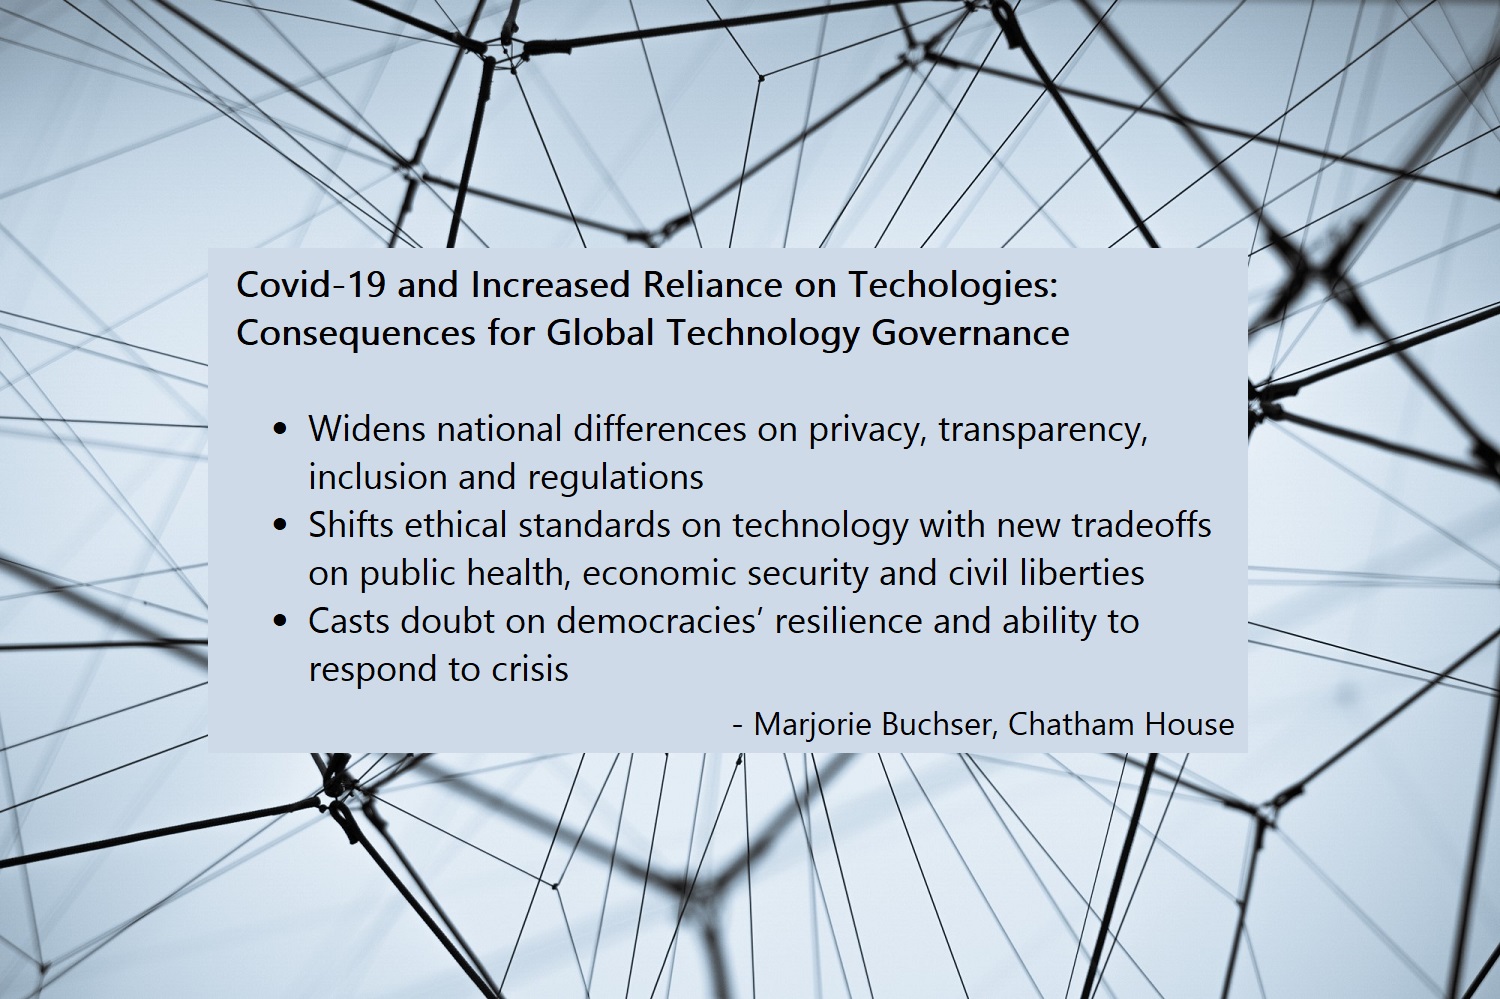 Consequences for Global Technology Governance  -	Widens national differences on privacy, transparency, inclusion and regulations  -	Shifts ethical standards on technology with new tradeoffs on public health, economic security and civil liberties   -	Casts doubt on democracies’ resilience and ability to respond to crisis  -	Marjorie Buchser, Chatham House